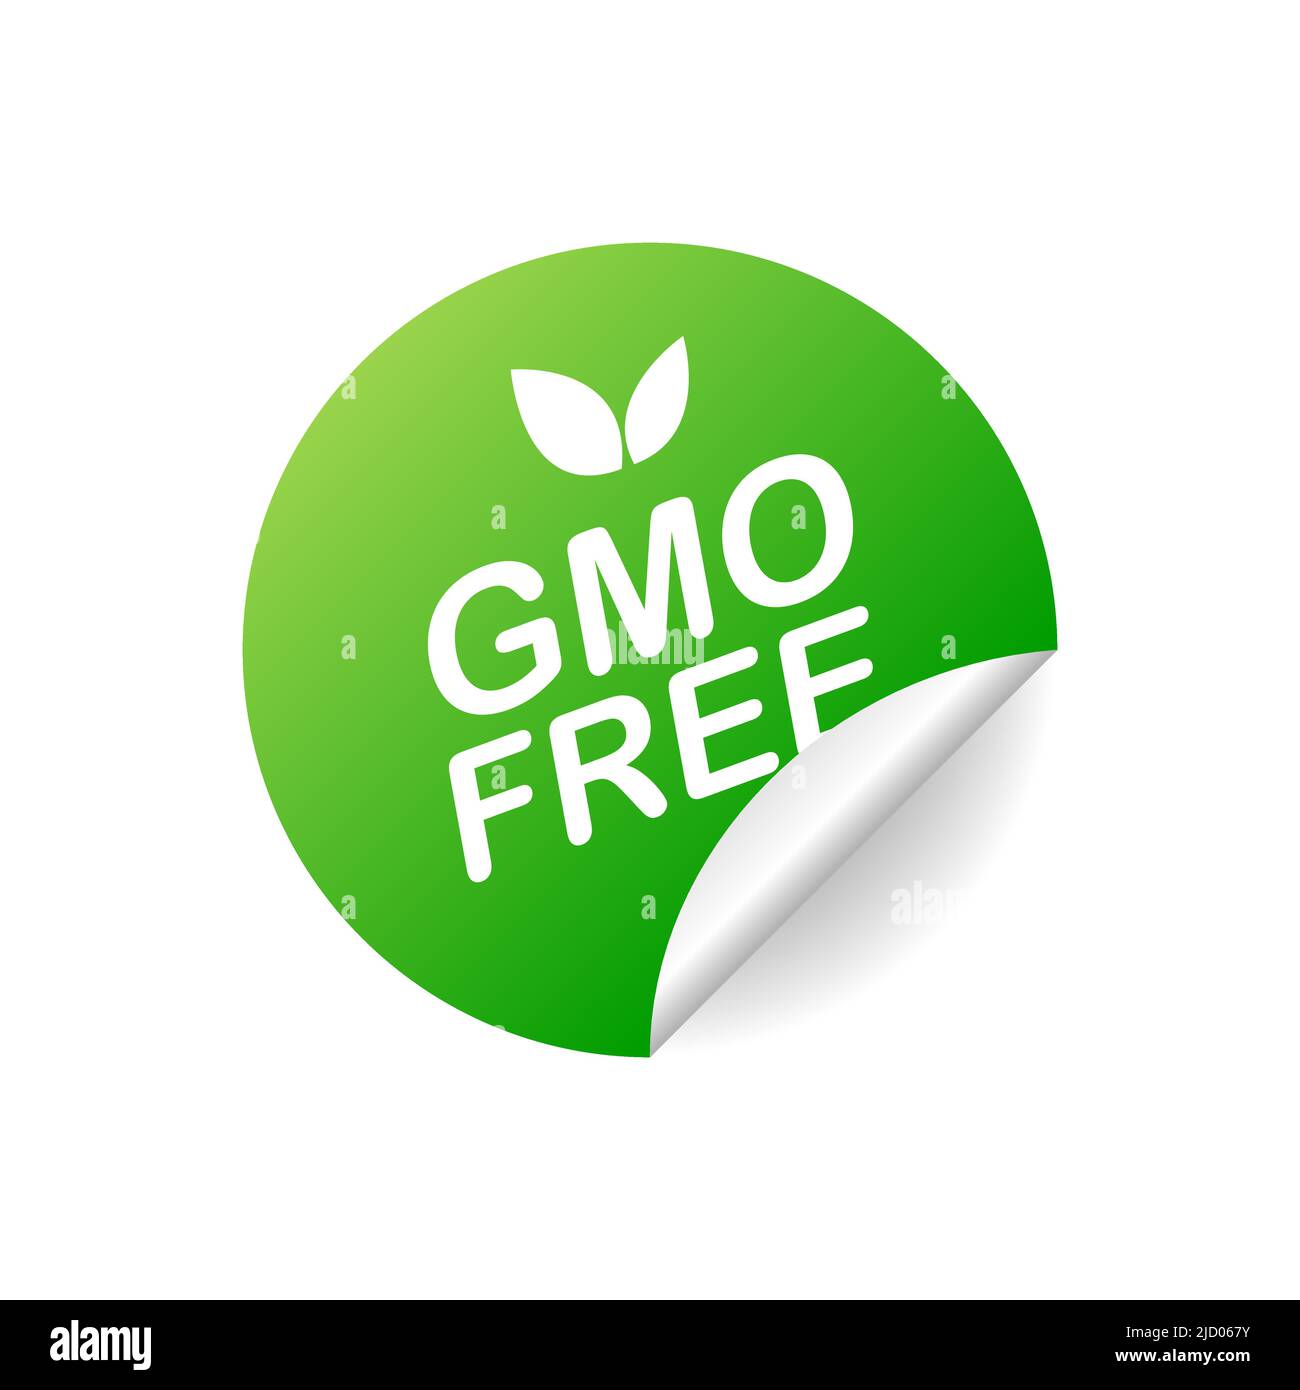 GMO free. Realistic green badge. Product advertising. Vector illustration. Stock Vector